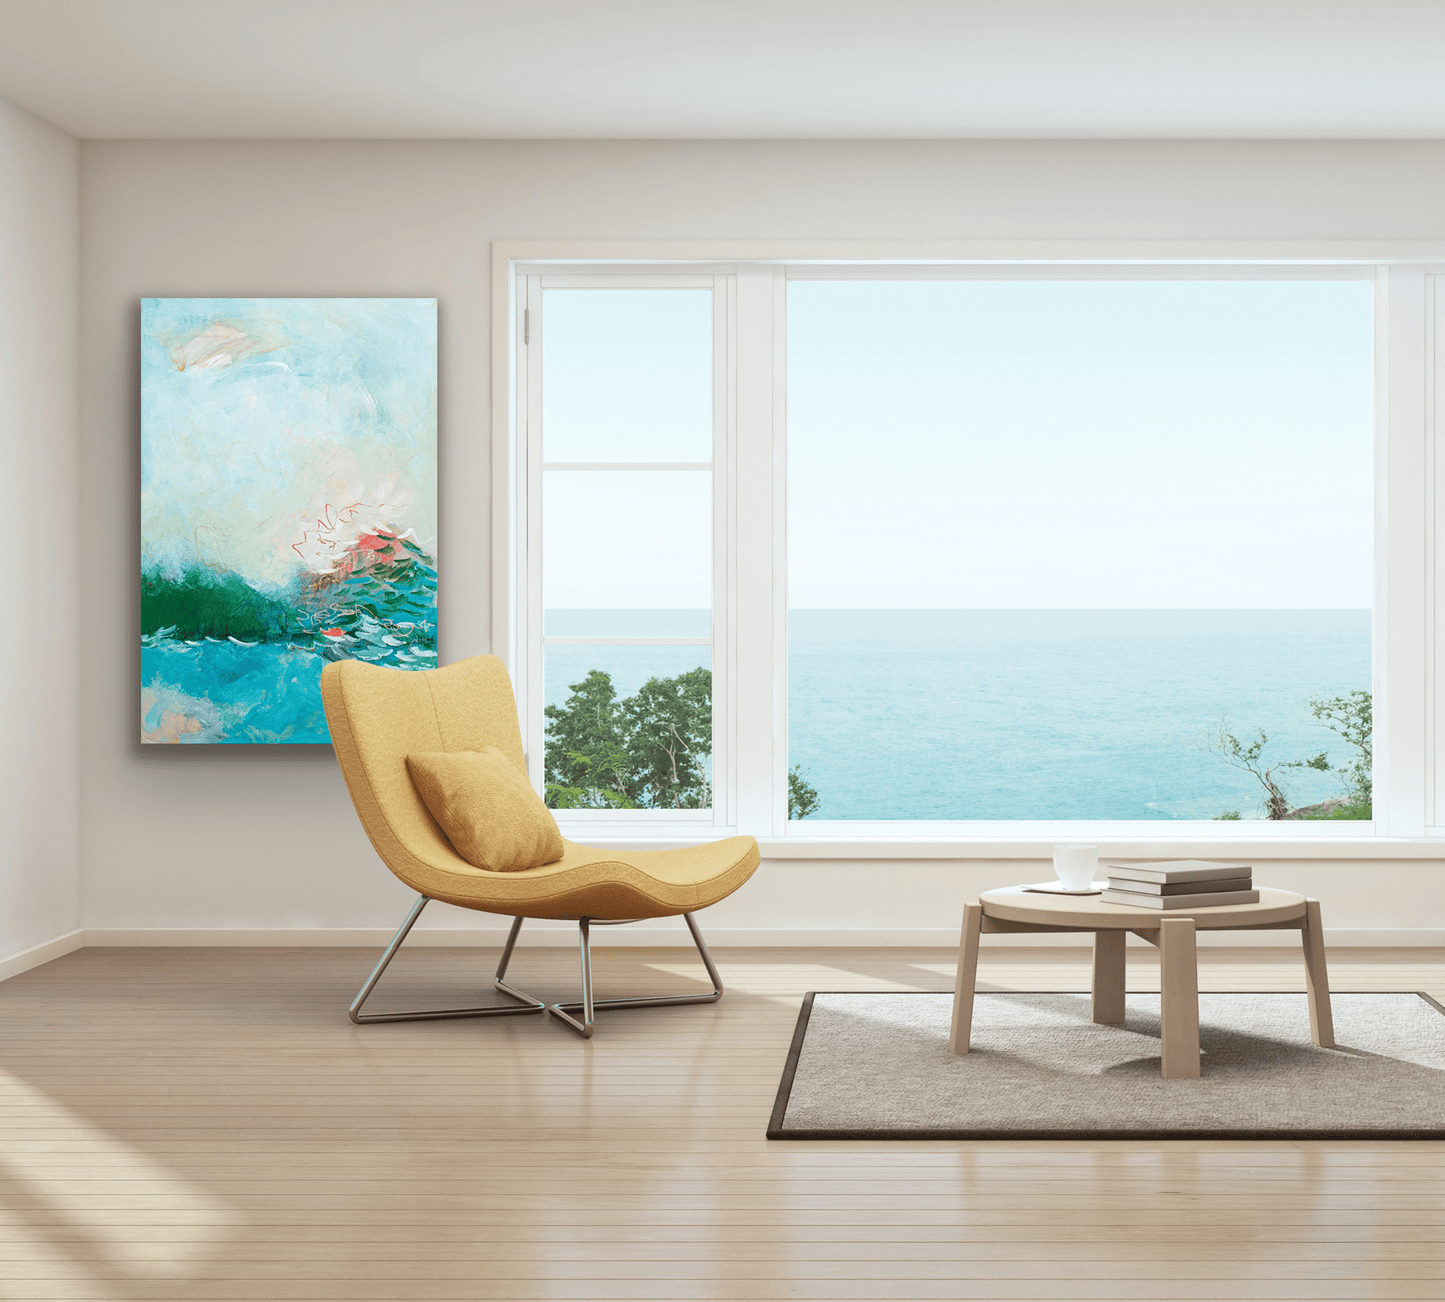 "Endless Horizon" painting has a calming feel and will compliment many decor stypes.